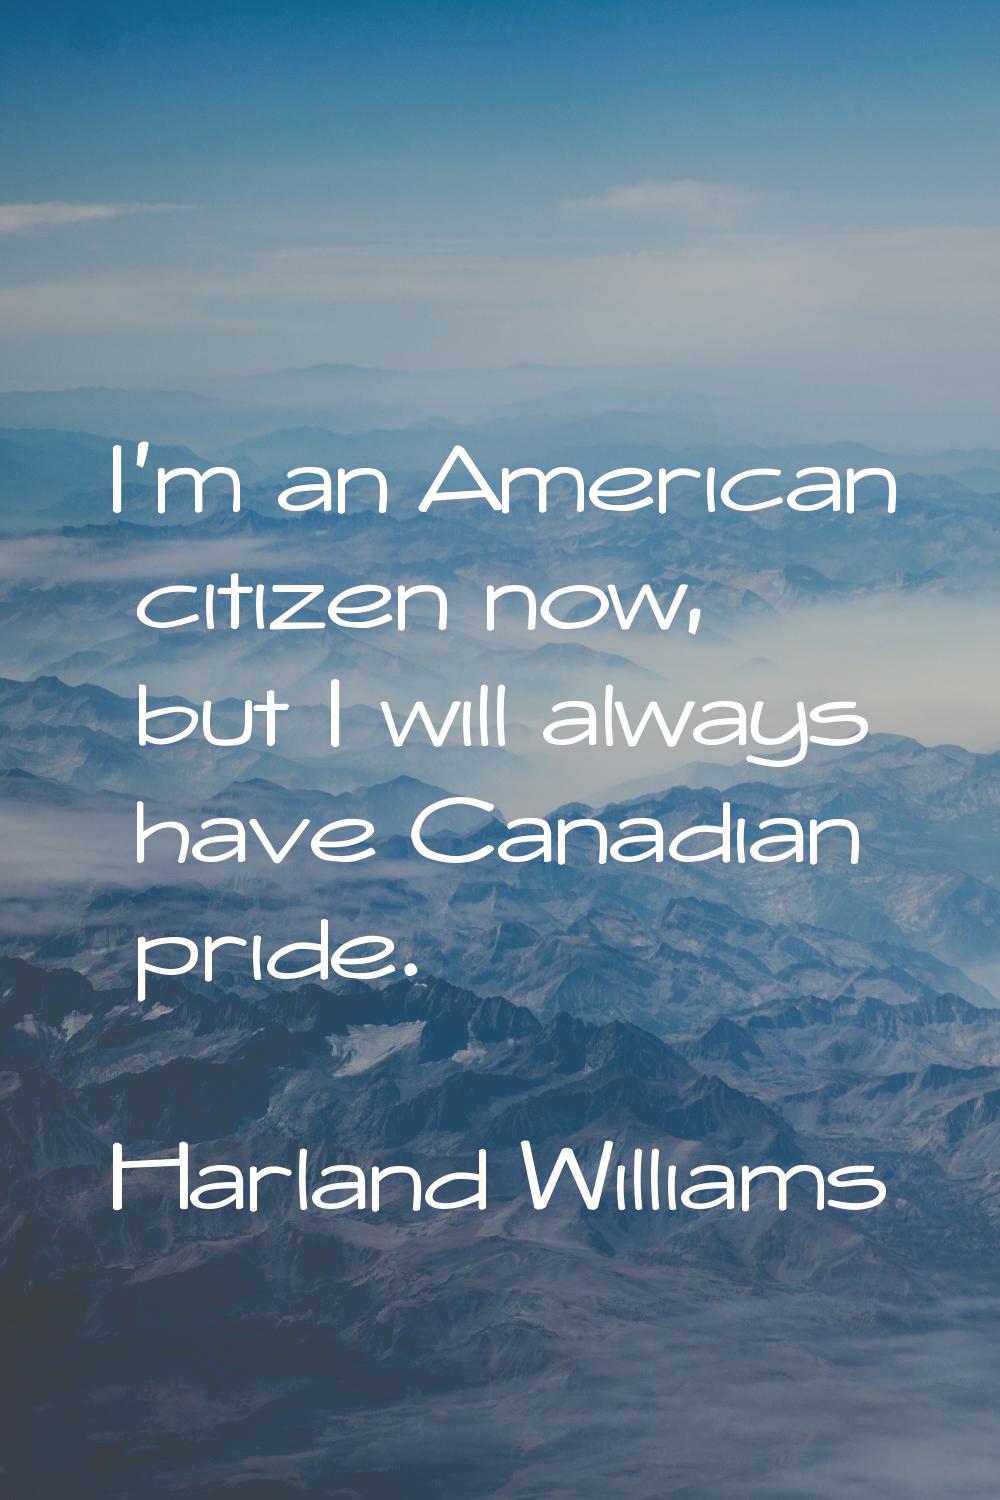 I'm an American citizen now, but I will always have Canadian pride.